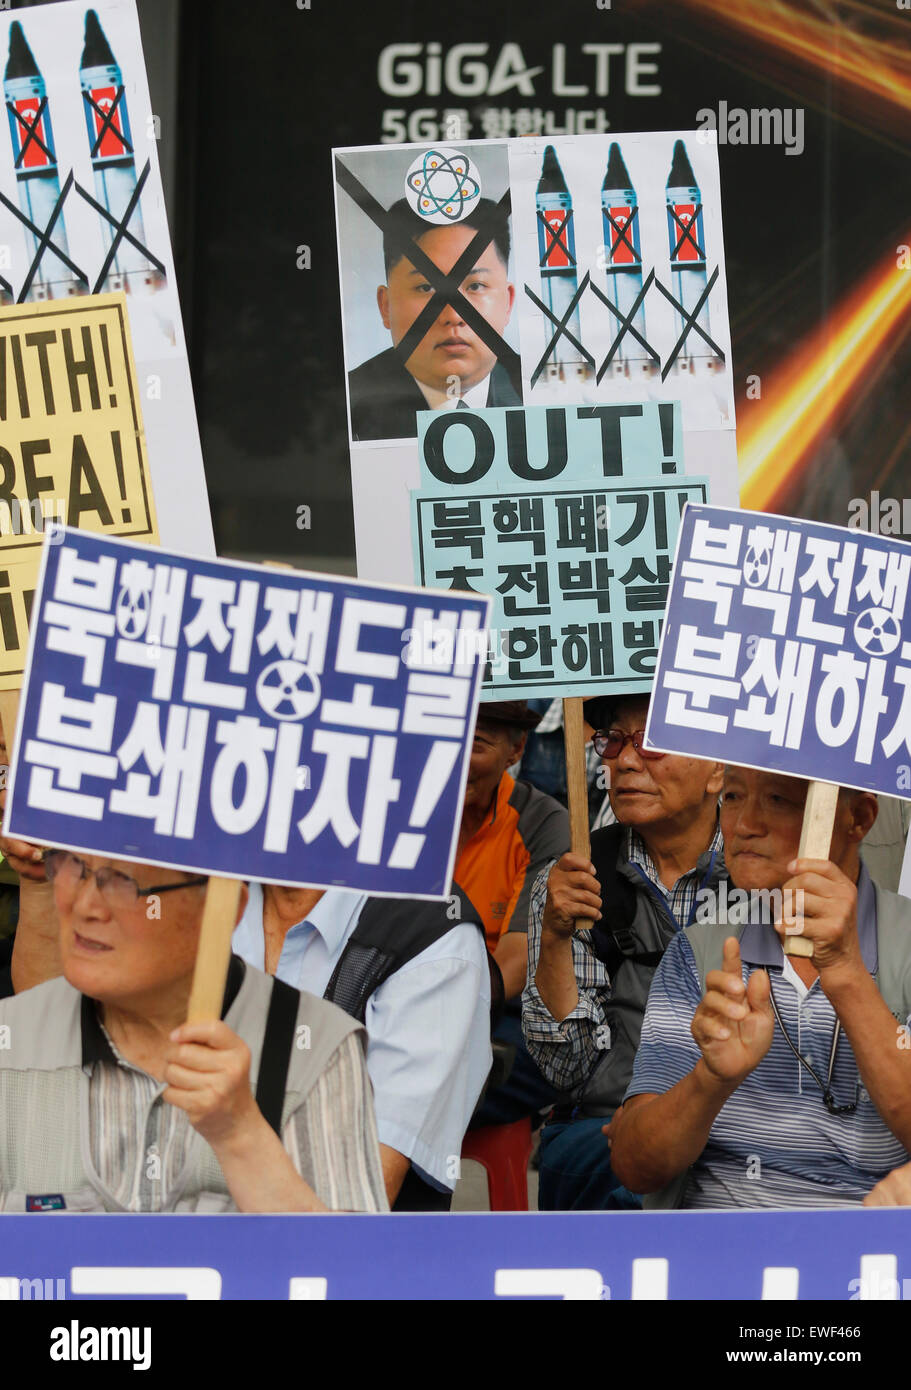 Seoul, South Korea. 25th June, 2015. Members of conservative and right-wing civic groups attend an anti-North Korea protest in Seoul, South Korea. On June 25, 1950, the Korean War had started and the conflict ended with a cease-fire, not a peace treaty, on July 27, 1953. Two Koreas are still technically at war. Credit:  Lee Jae-Won/AFLO/Alamy Live News Stock Photo